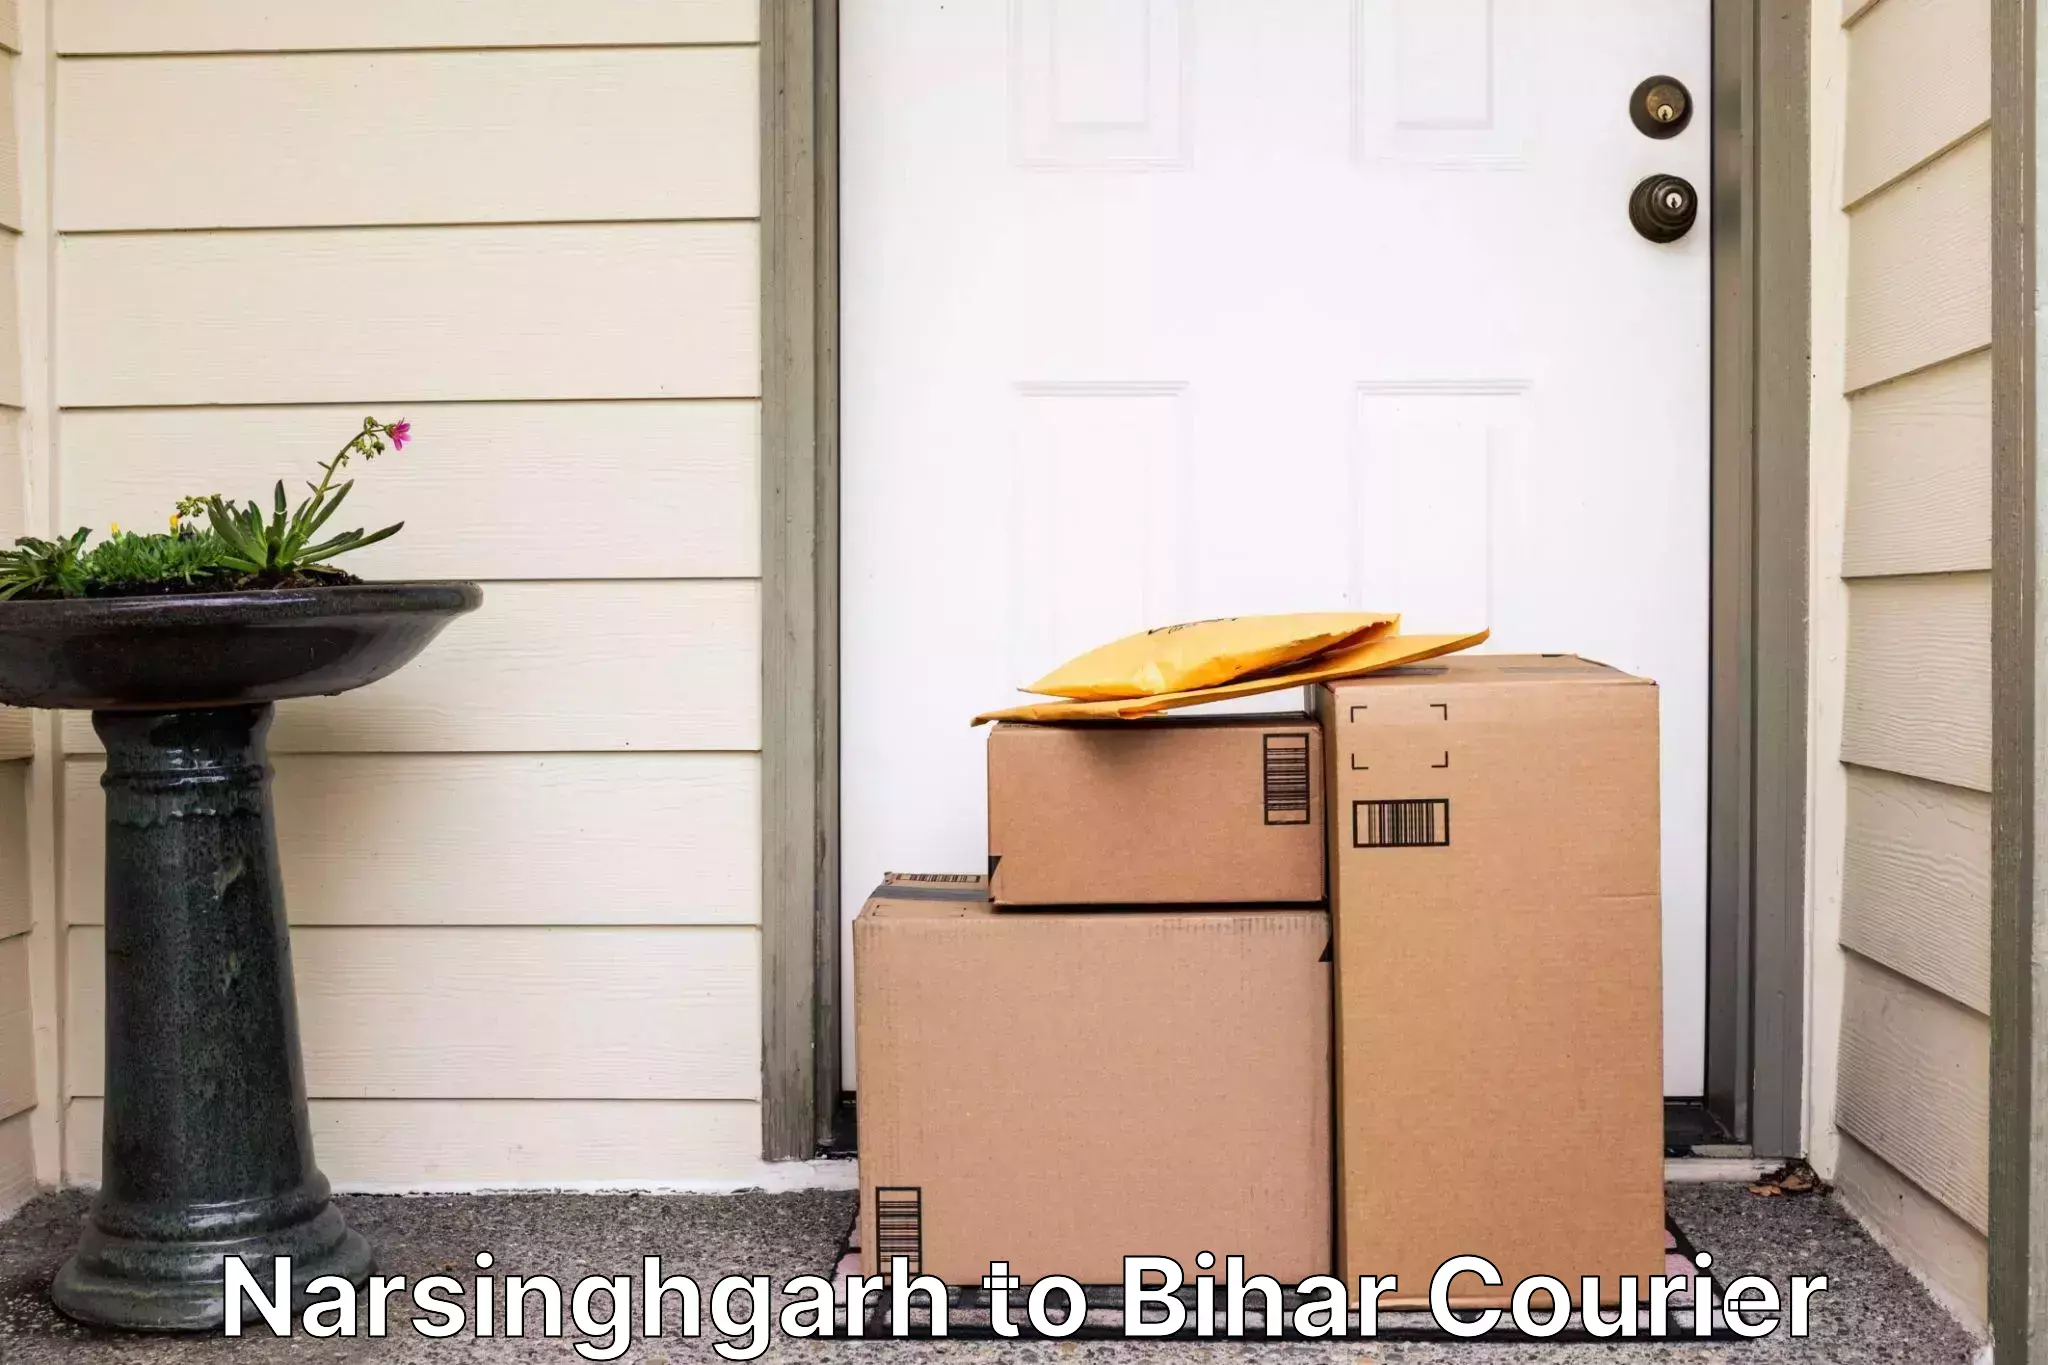 24-hour delivery options Narsinghgarh to Bihar